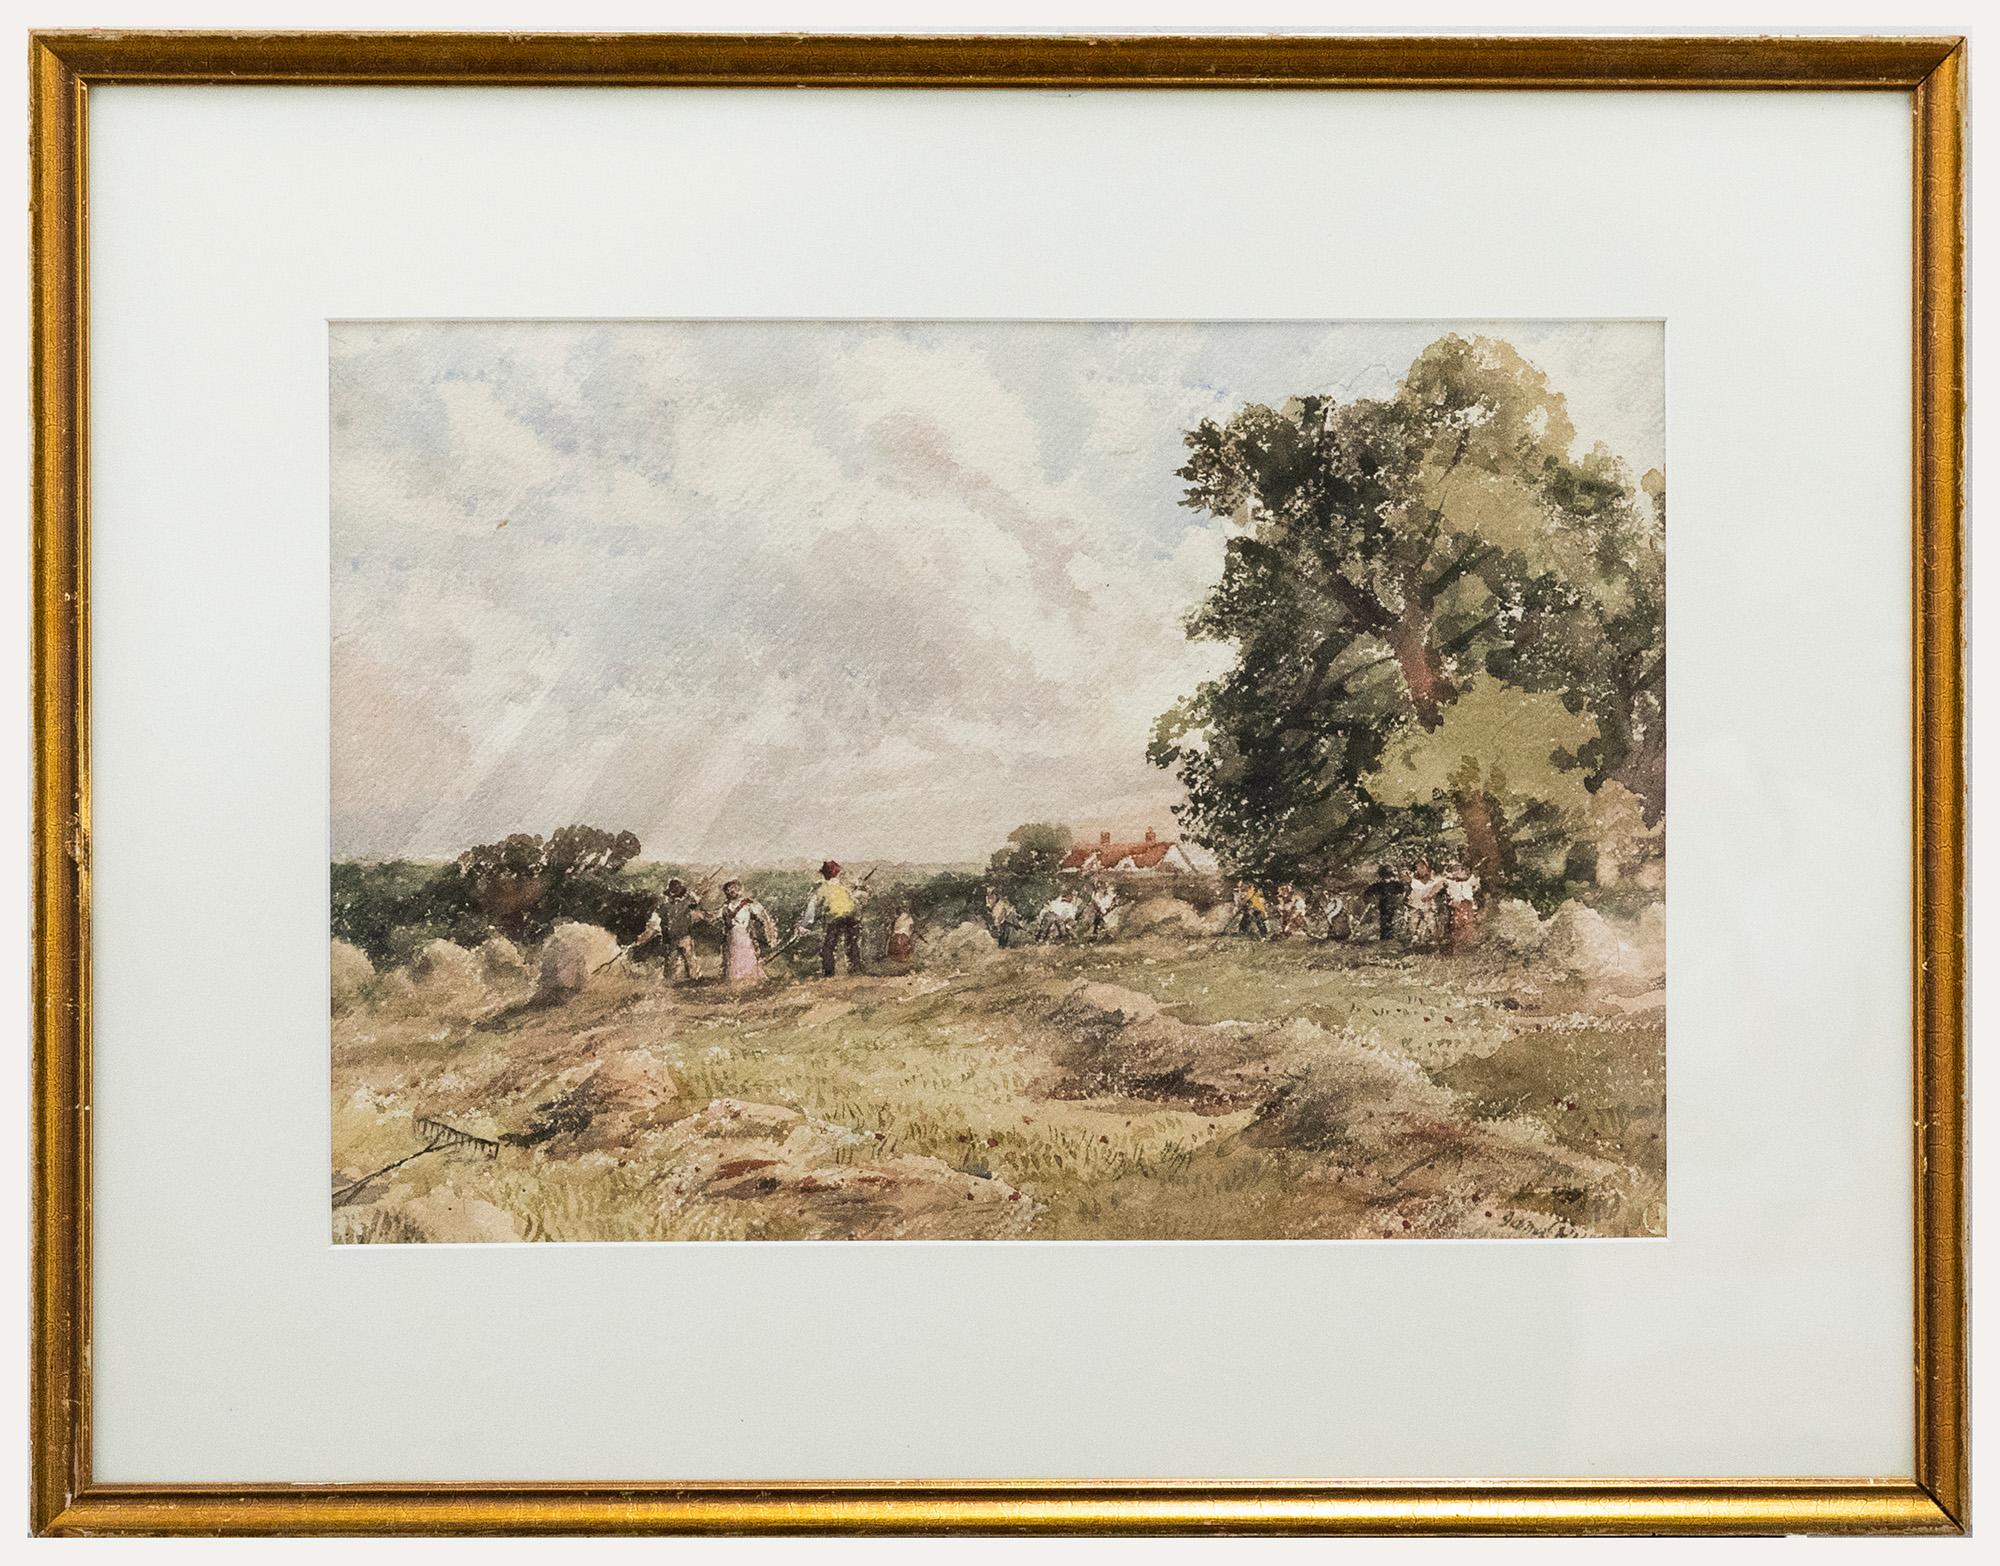 Unknown Landscape Art - James Price (exh.1842-76) - 19th Century Watercolour, Harvesters at Work